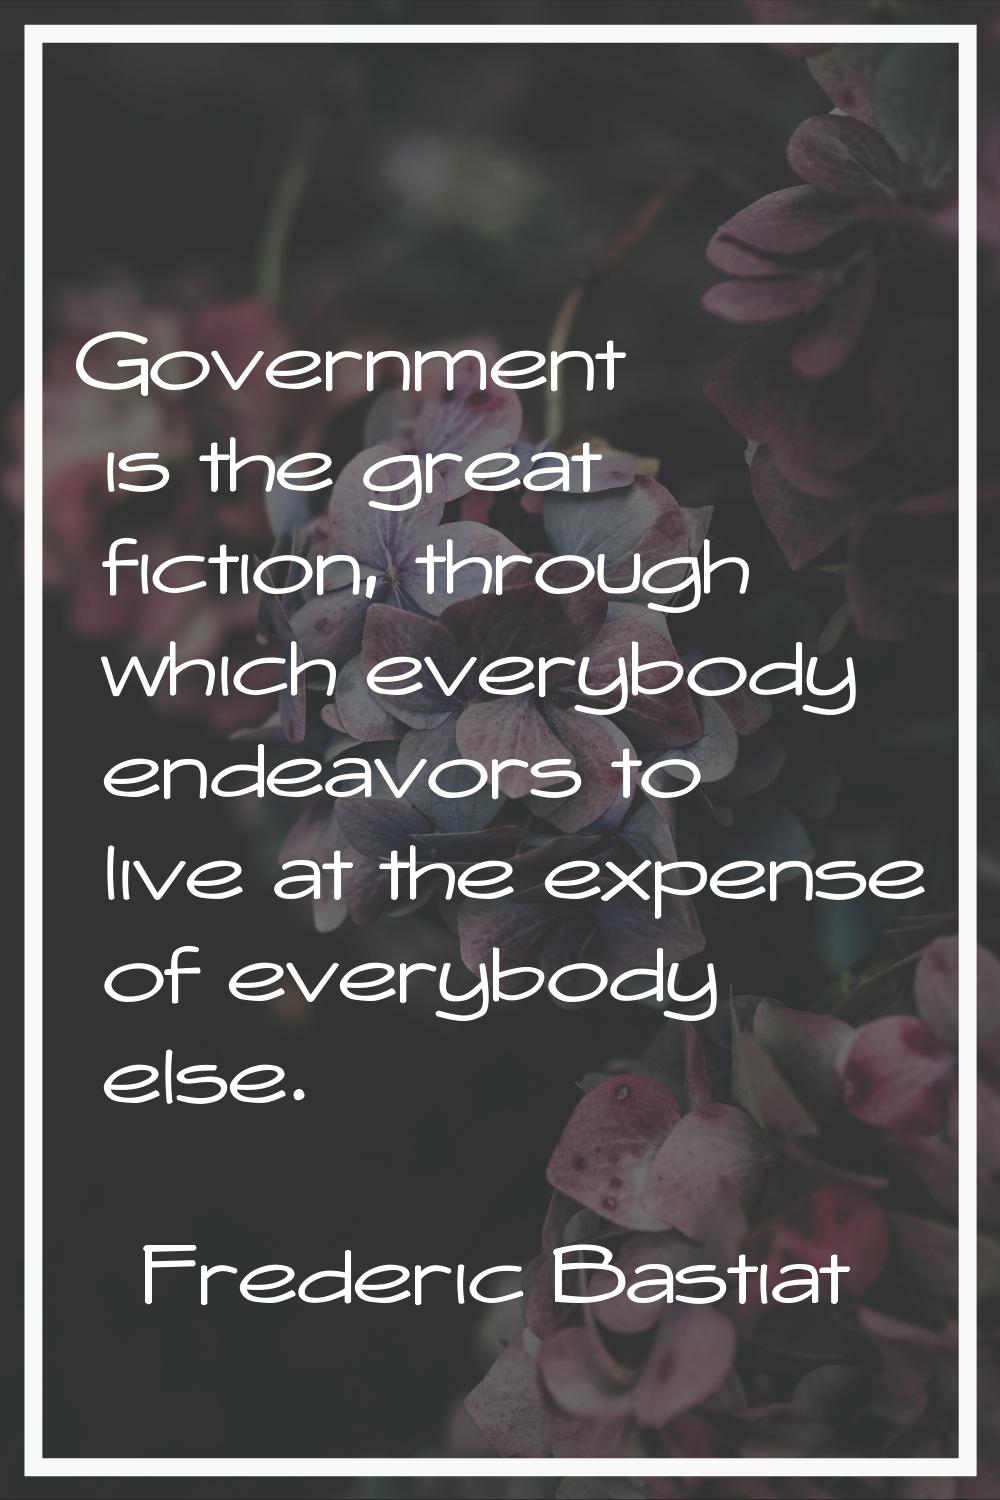 Government is the great fiction, through which everybody endeavors to live at the expense of everyb